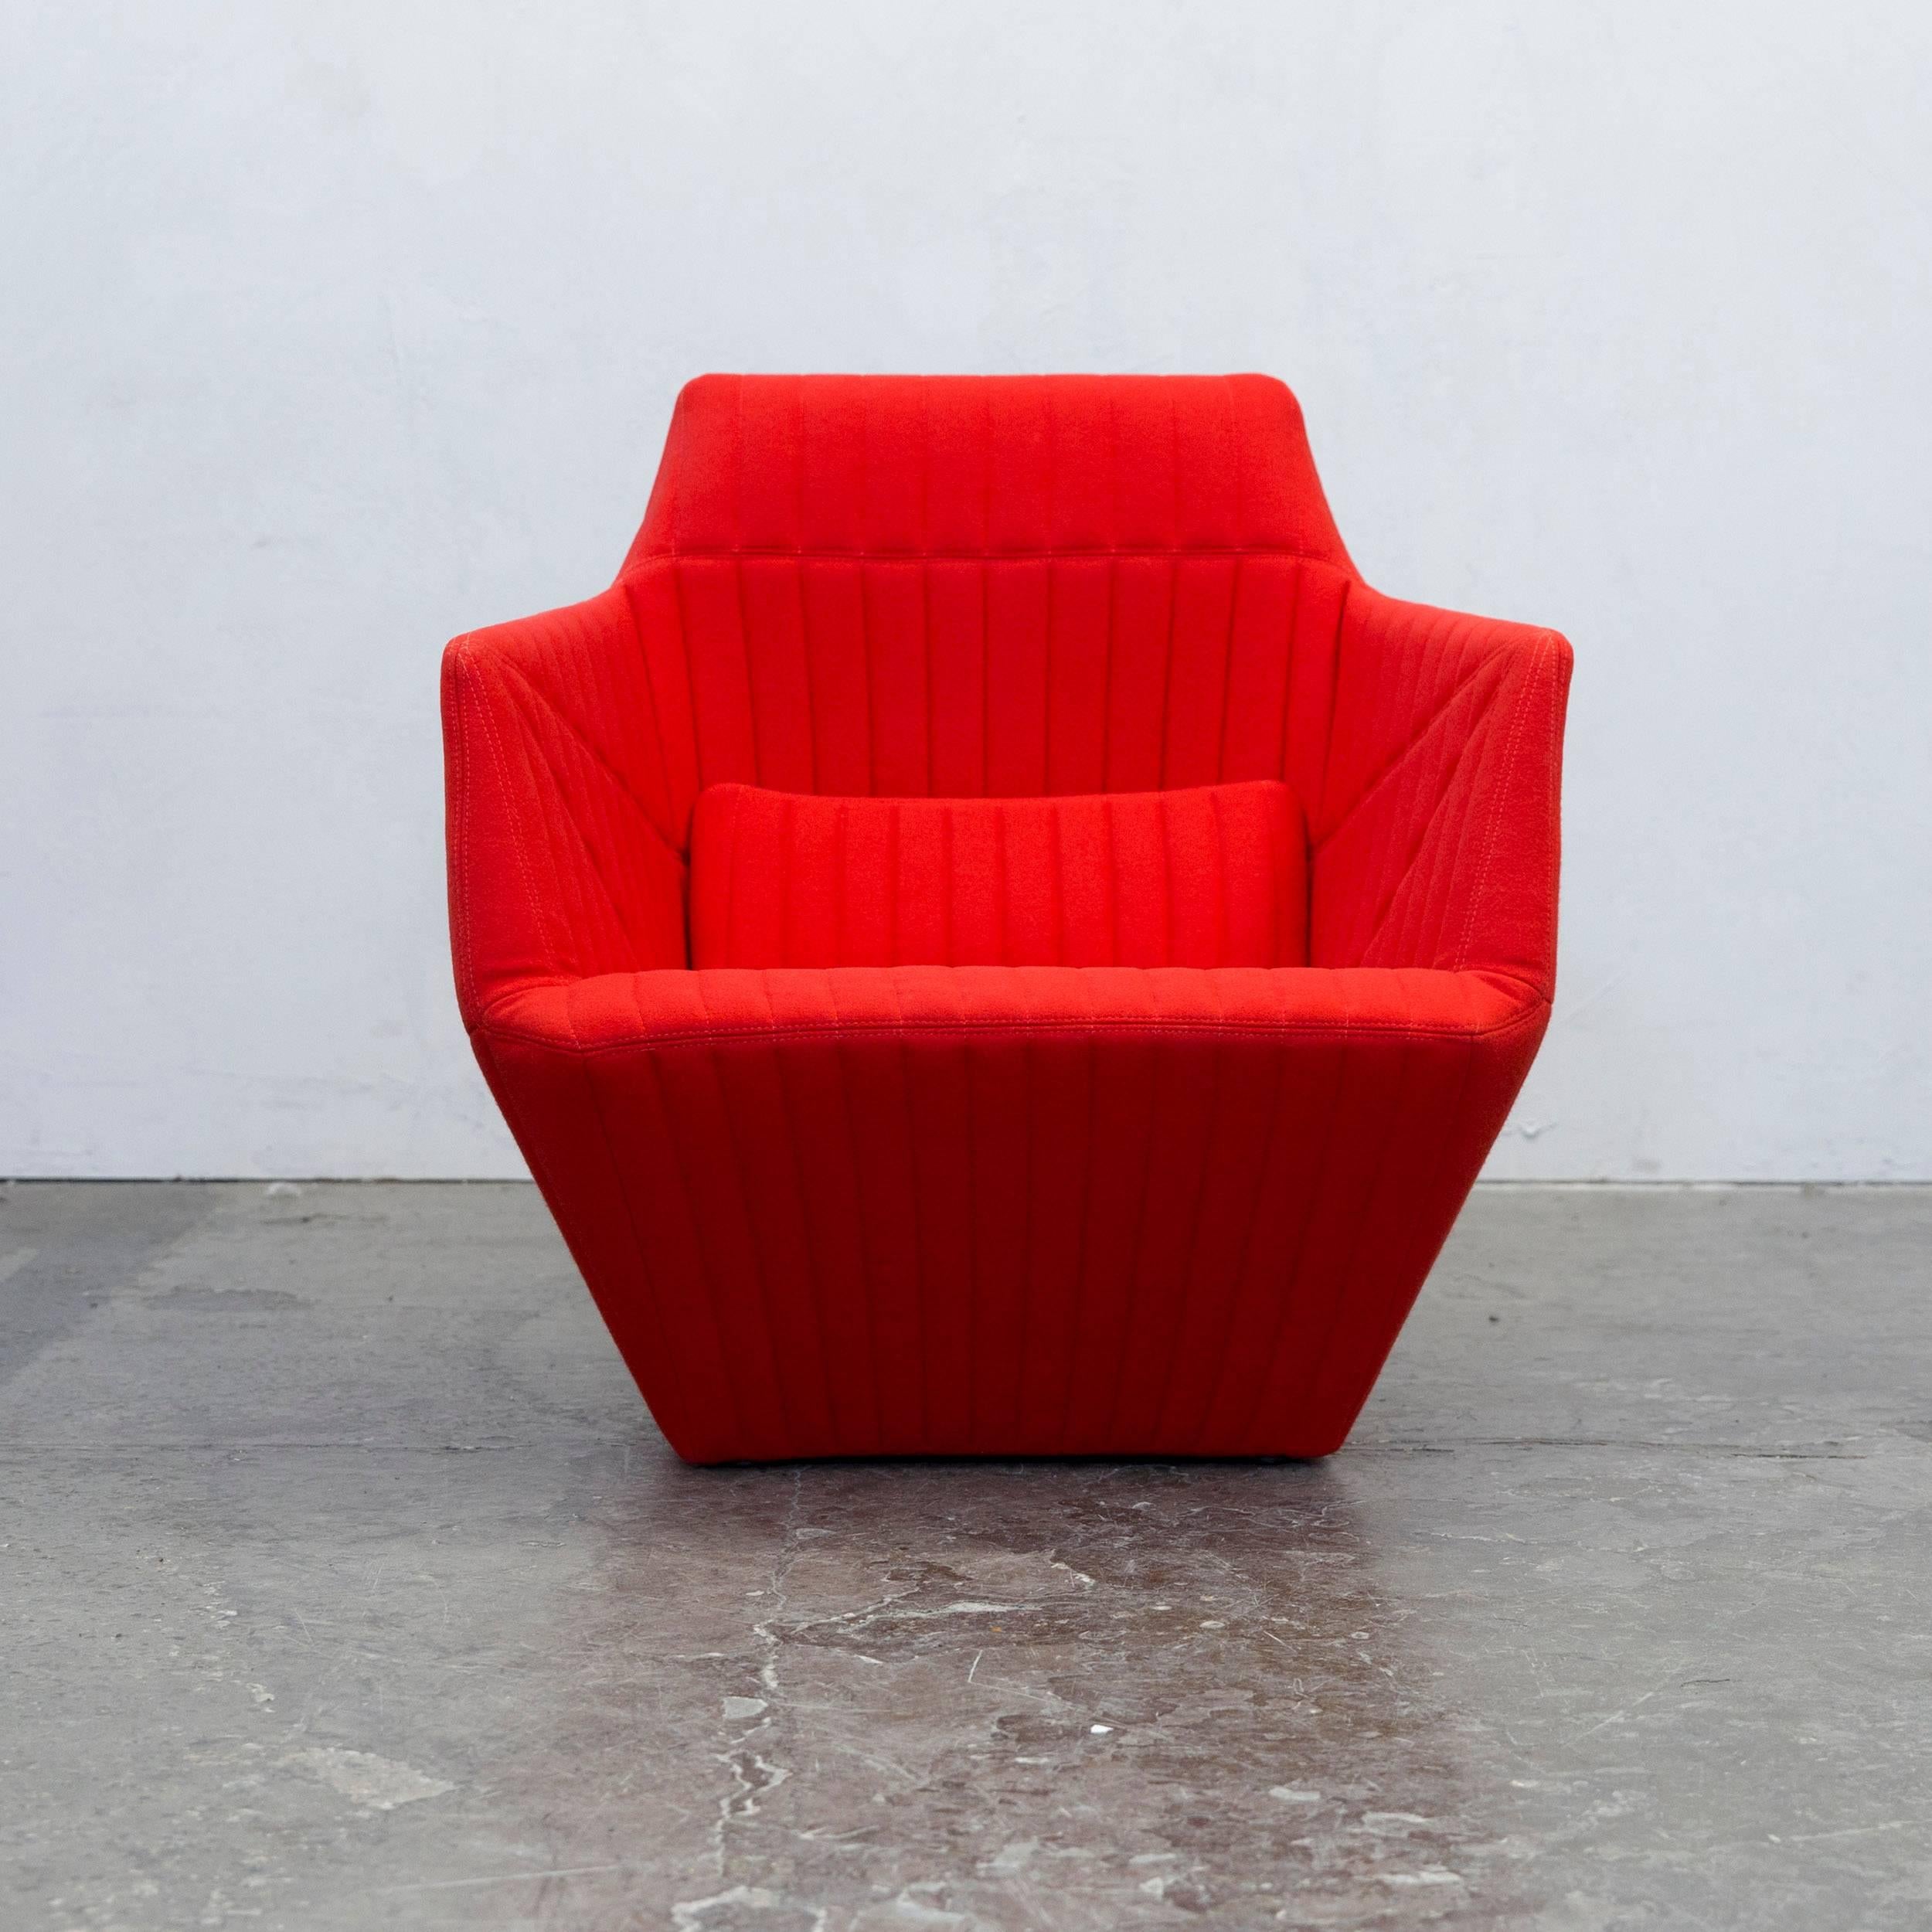 Red colored original Ligne Roset Facett chair, designed by R. & E. Bourroullec, in a minimalistic and modern design.